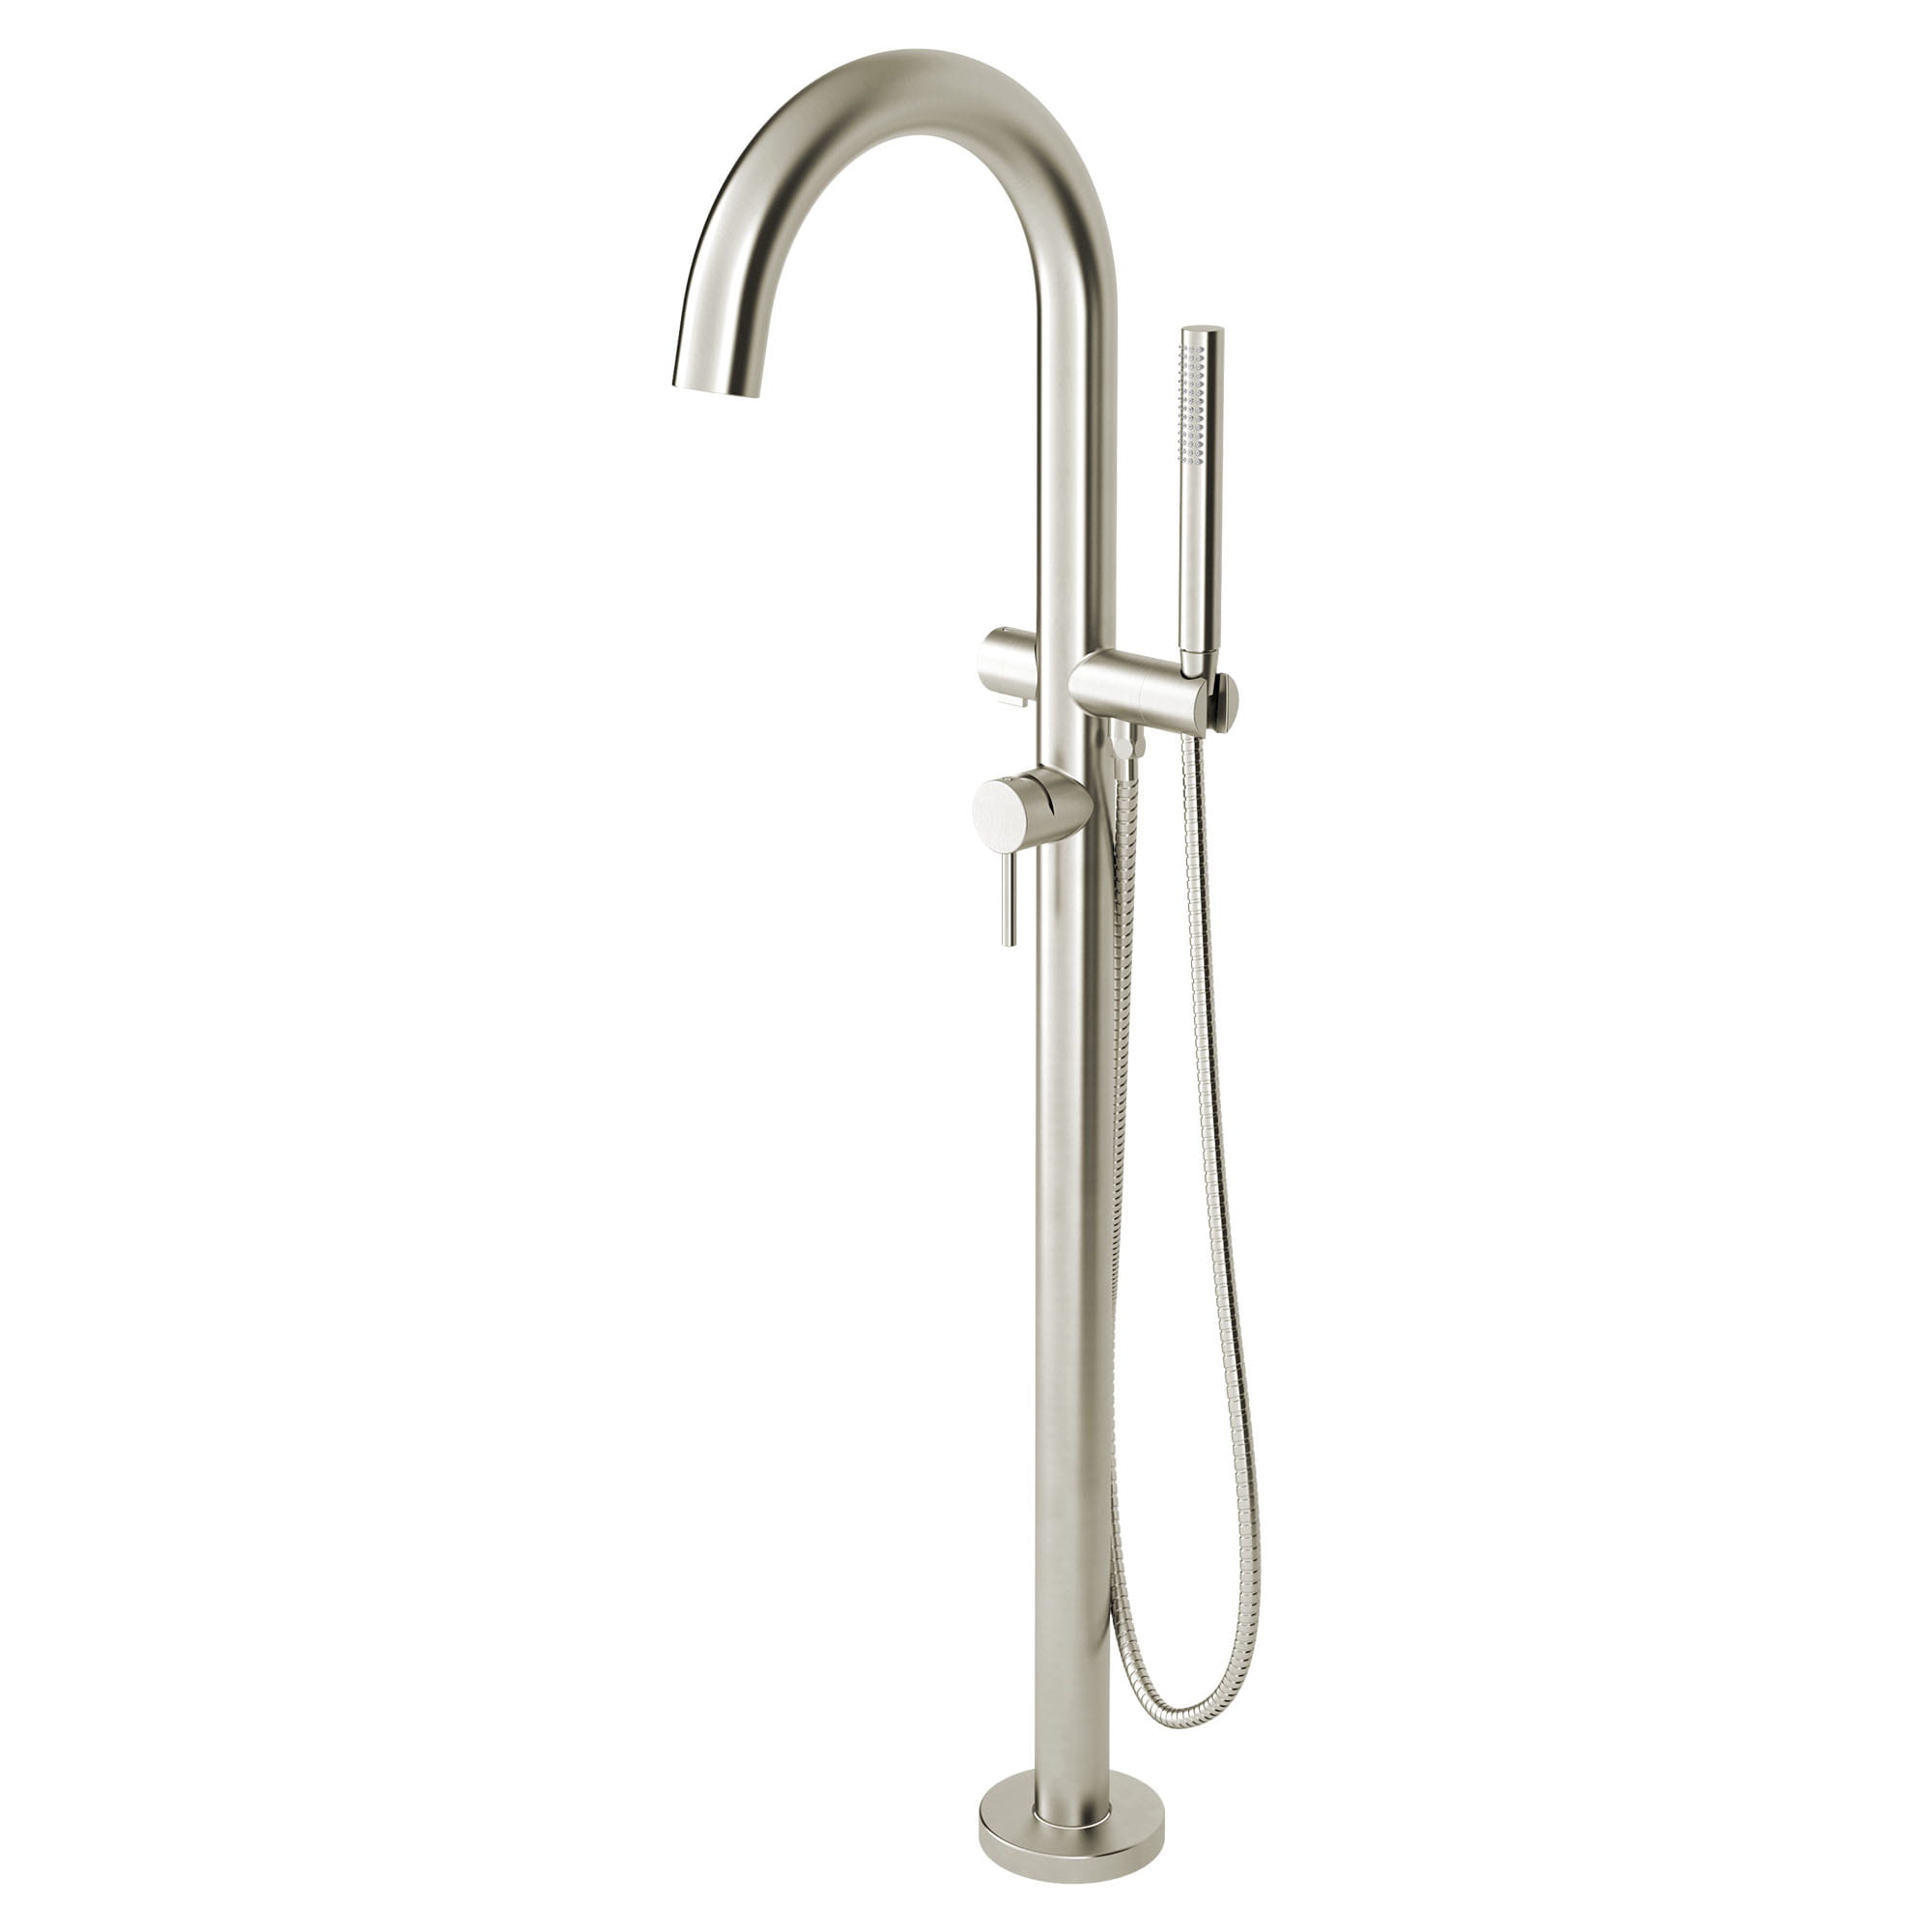 Contemporary Round Freestanding Tub Faucet with Personal Shower for Flash Rough in Valve with Lever Handle   BRUSHED NICKEL